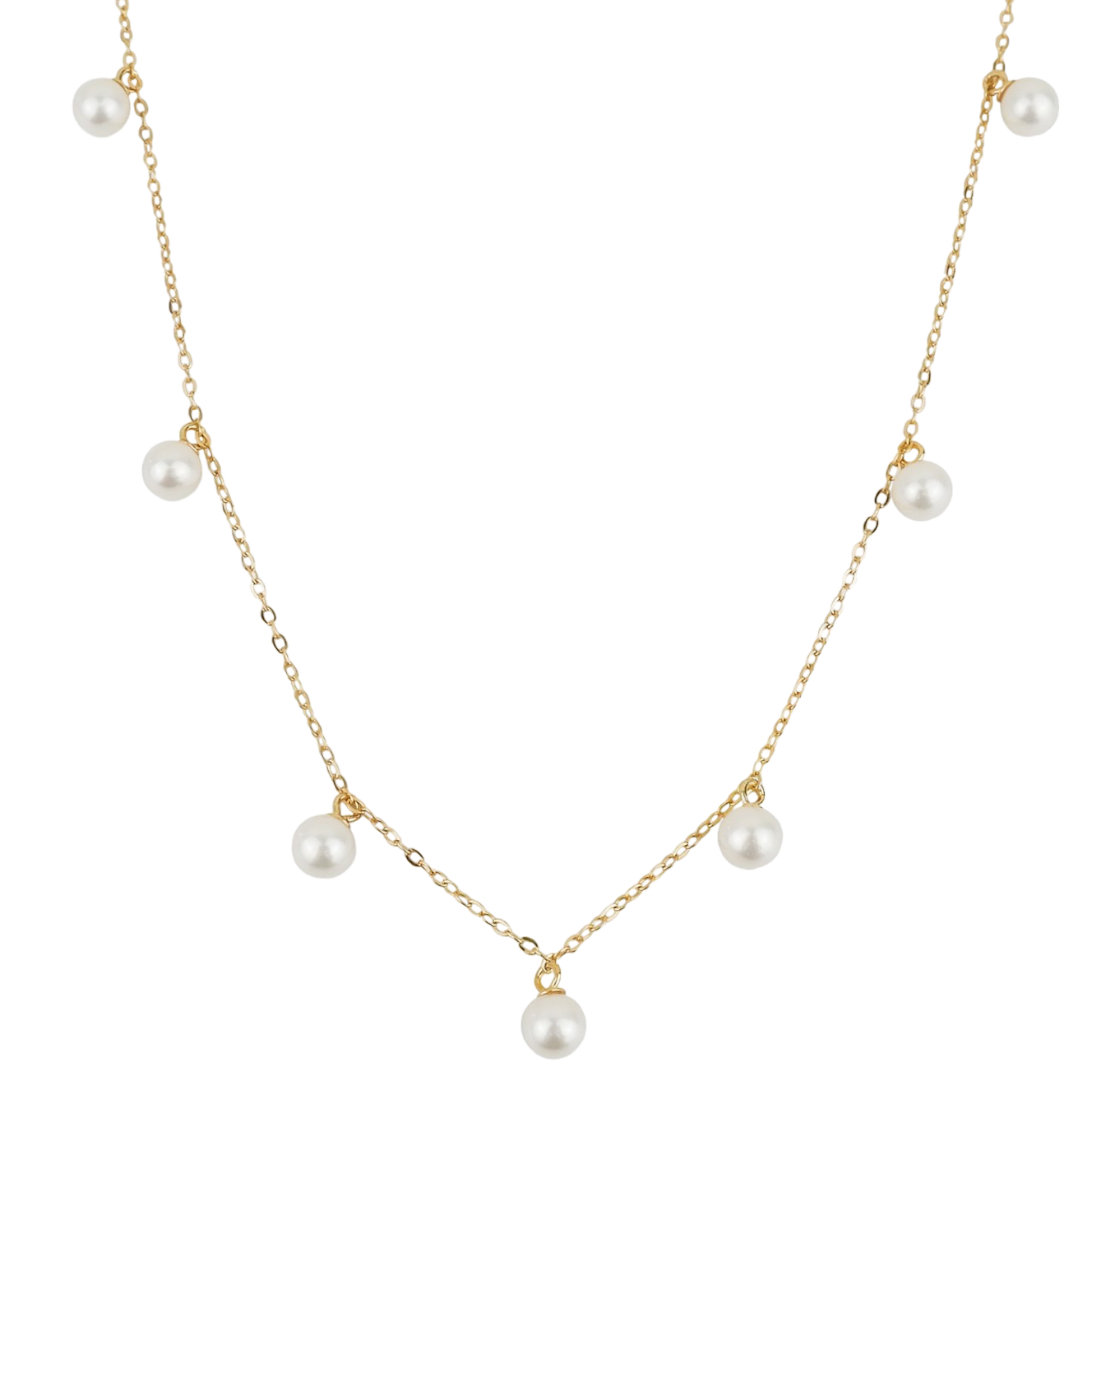 Raindrop Pearl Necklace